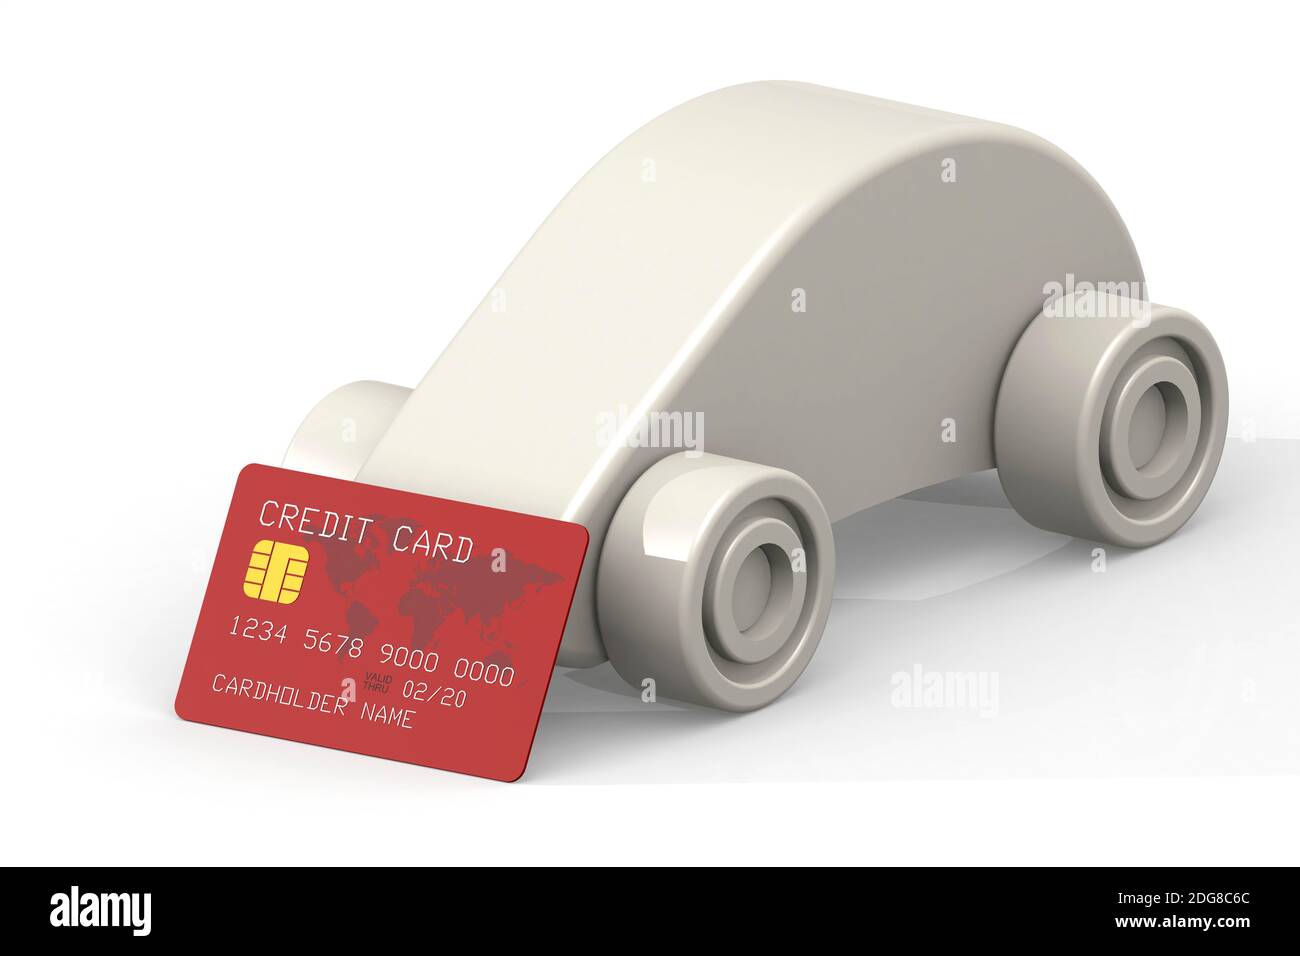 Red credit cards and car model, 3d rendering Stock Photo